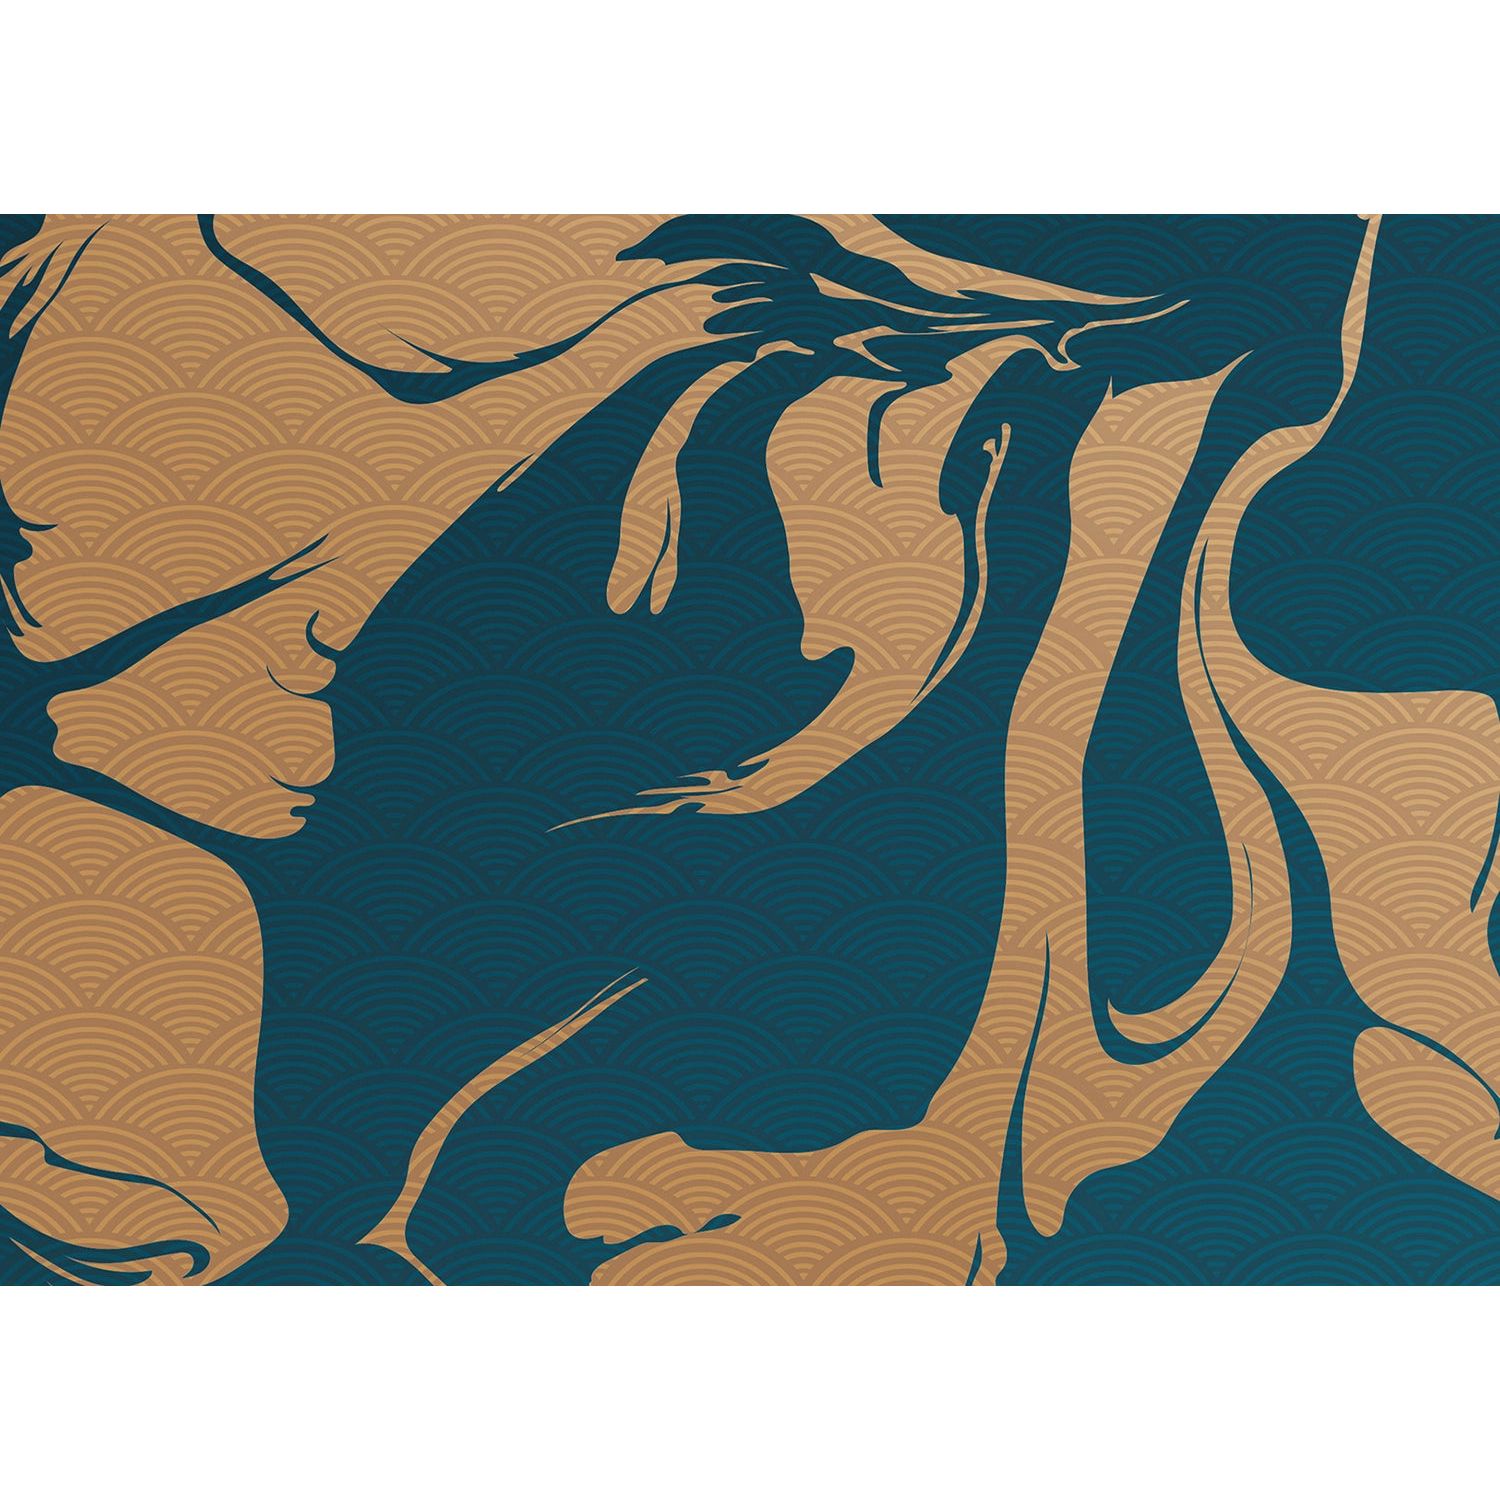 Golden Blue Elegance: Flowing Abstract Wall Mural